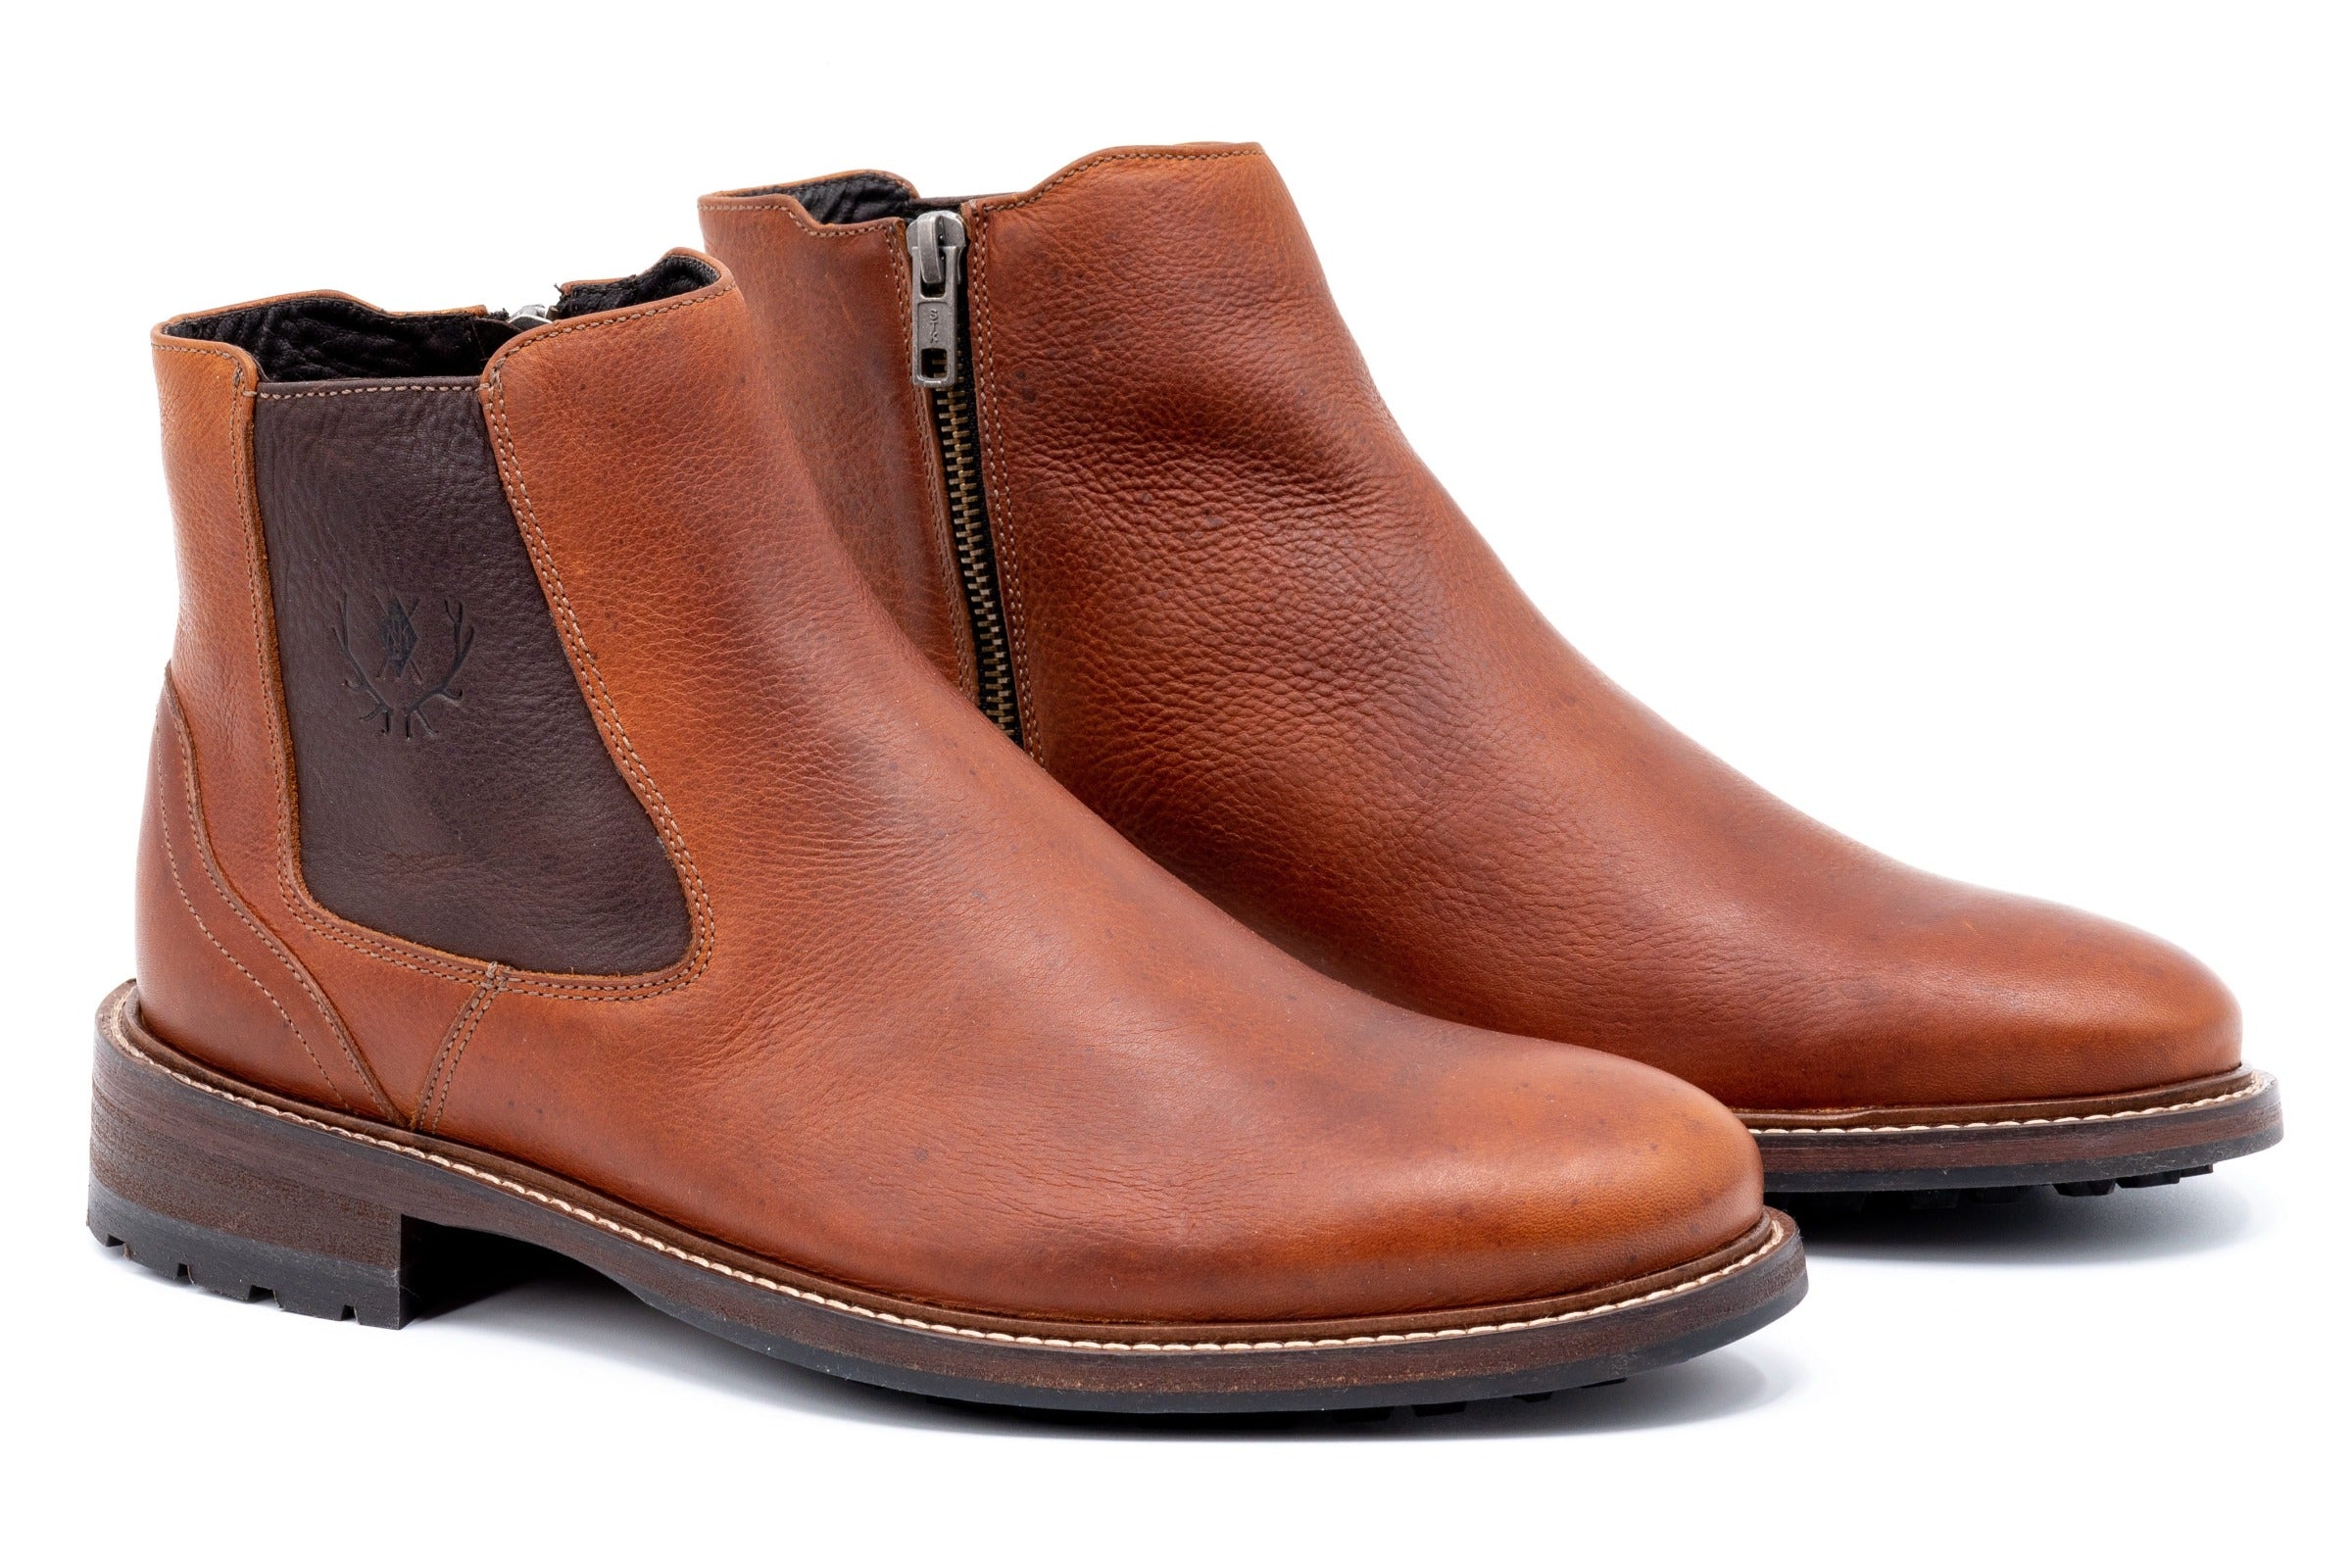 McKinley Saddle Leather Boots - Chestnut